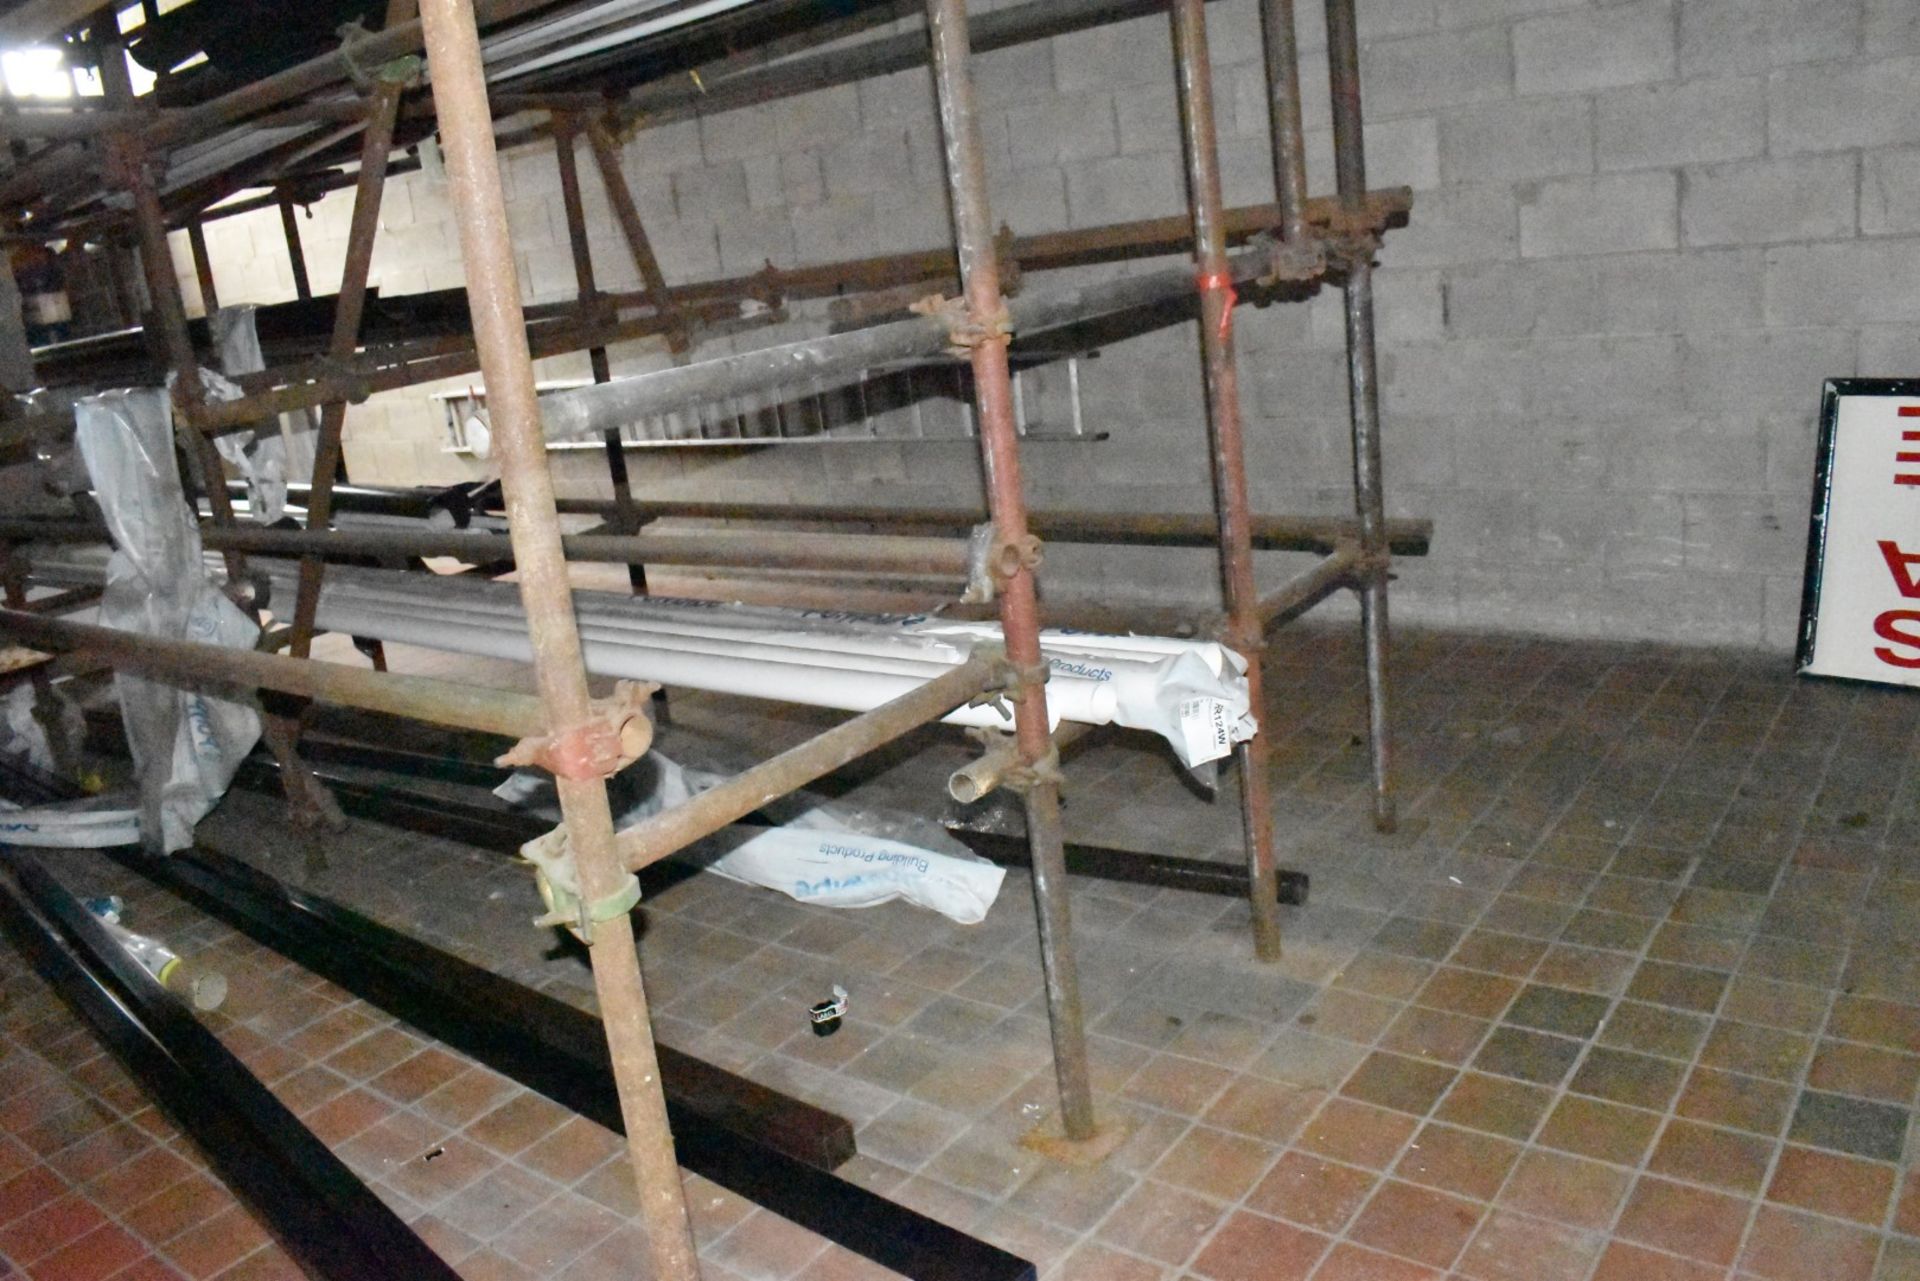 1 x Large Collection of Scaffolding and Fixtures Covering a Floor Space of Approx 13 x 13ft - Image 8 of 15